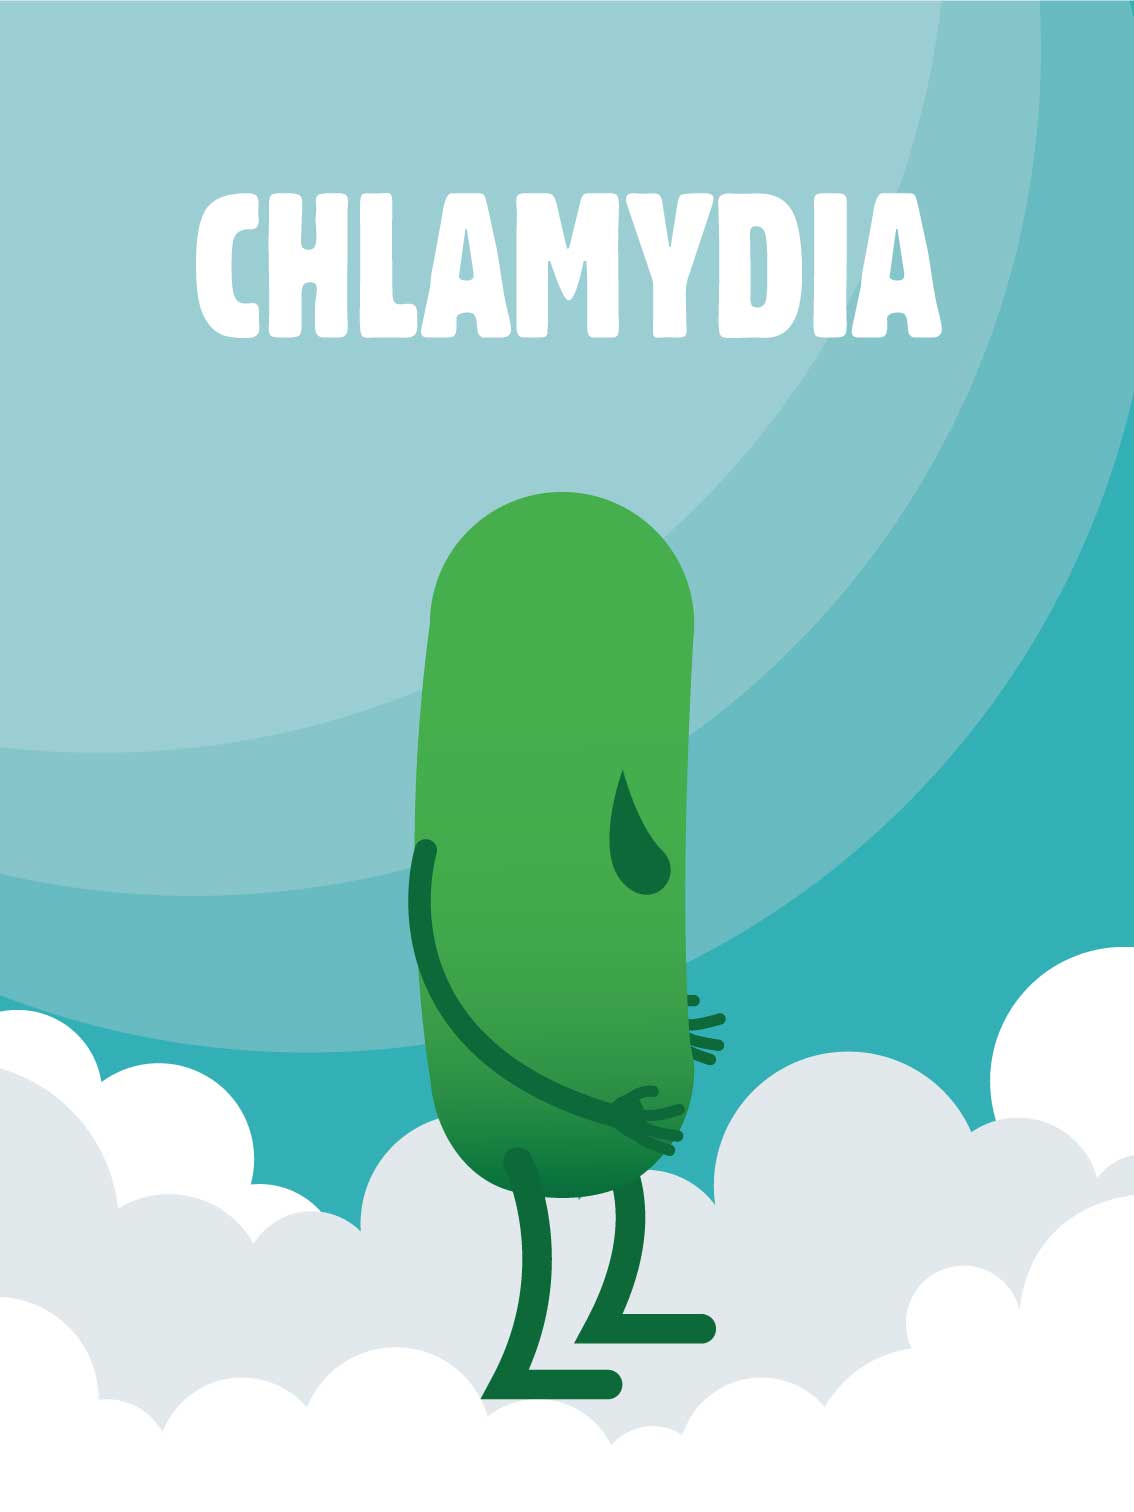 Chlamydia, screening, STIs, STDs, sexually transmitted infections, unsafe sex